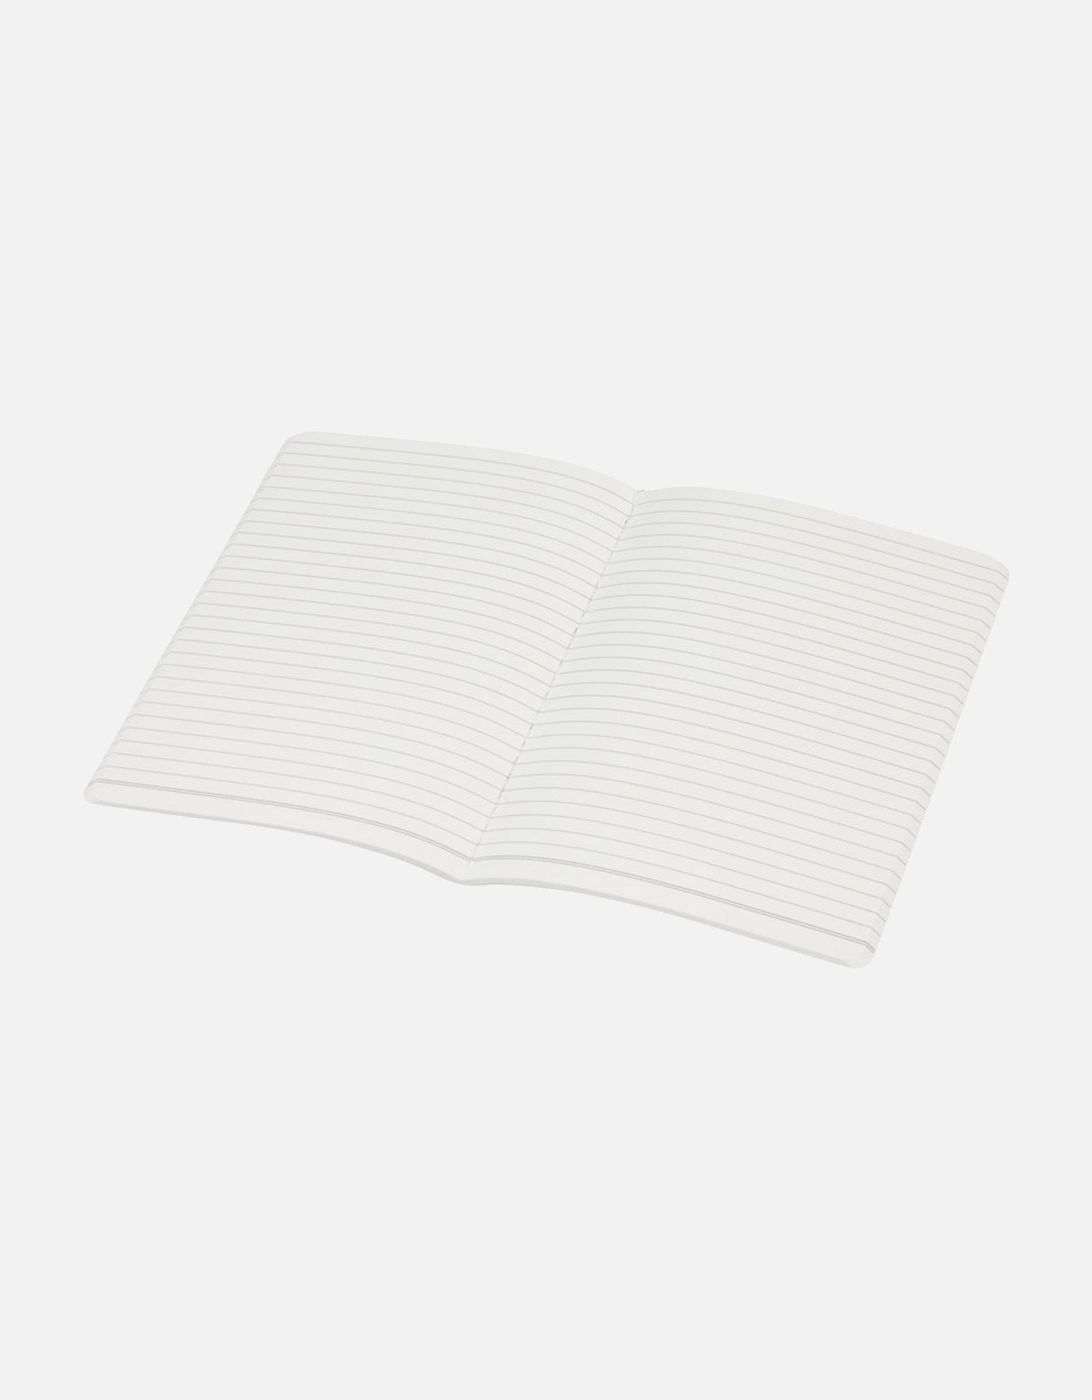 Printed Shale Stone Paper Journal